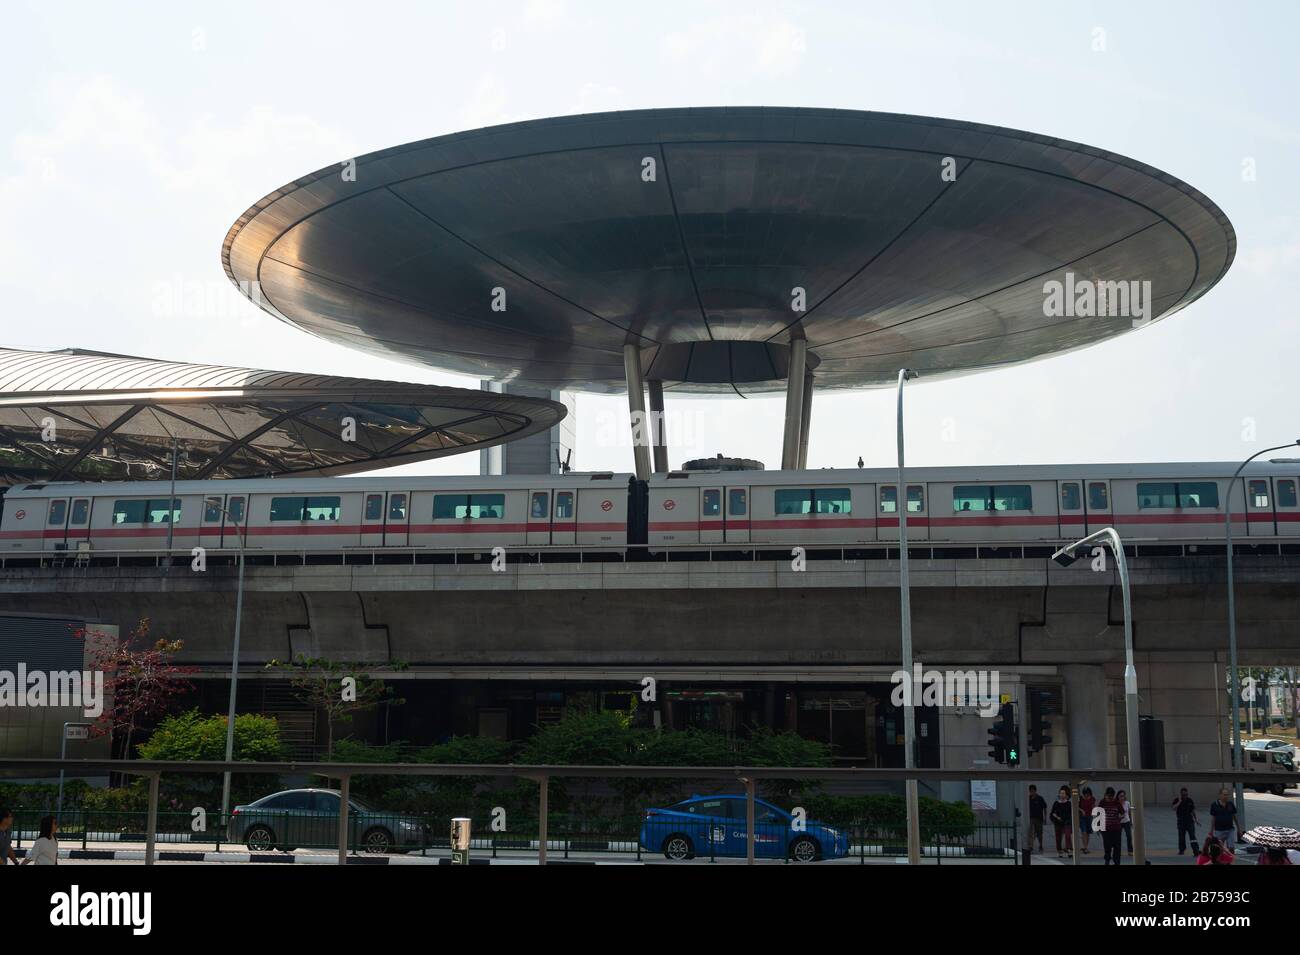 22.03.2019, Singapore, Republic of Singapore, Asia - Exterior view of the Expo stop of the MRT light rail system. The station was designed by the British architect Sir Norman Foster. [automated translation] Stock Photo